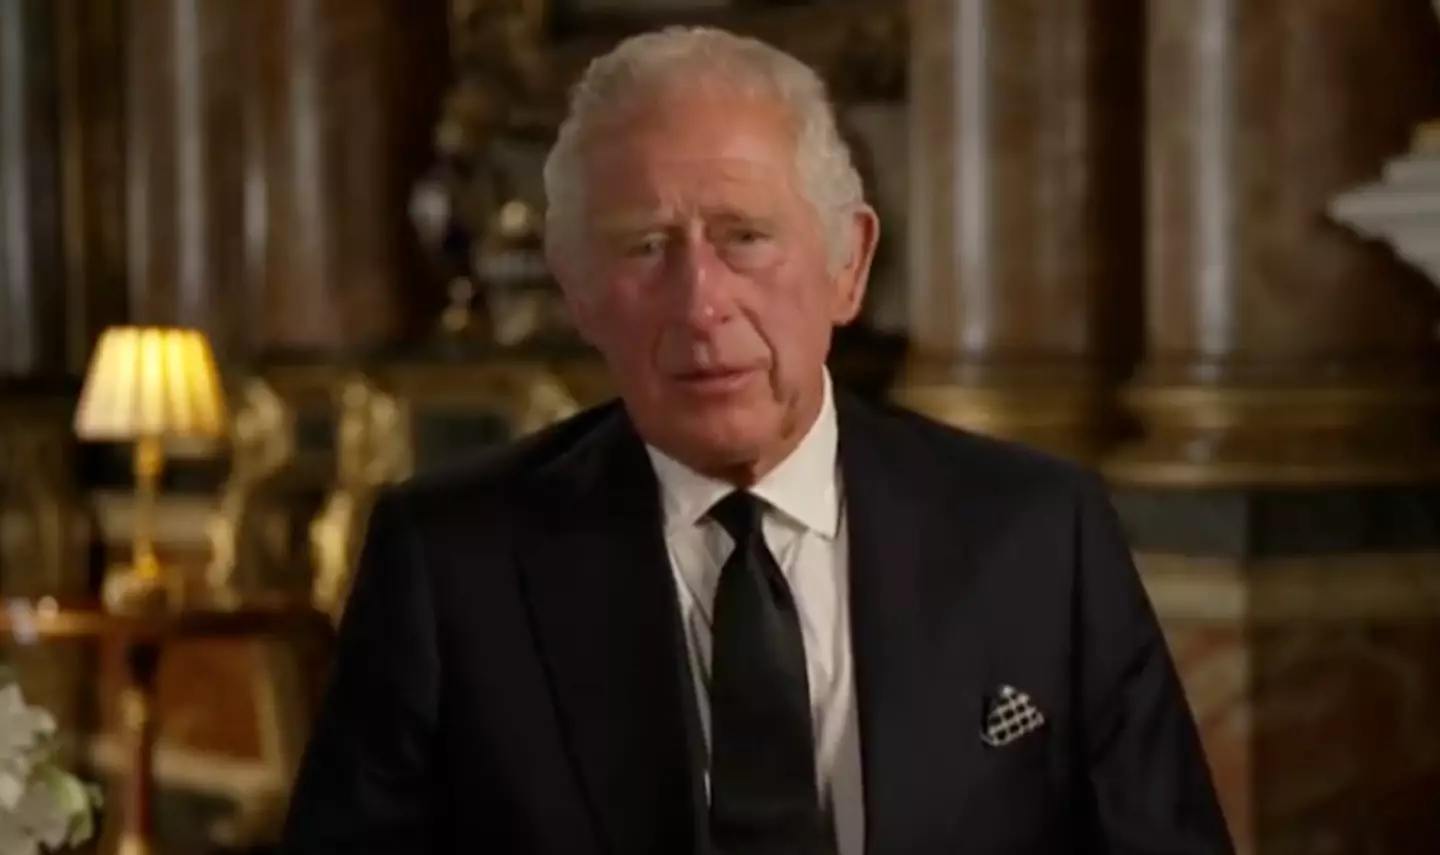 King Charles III announced new titles for Prince William and Kate in his address.